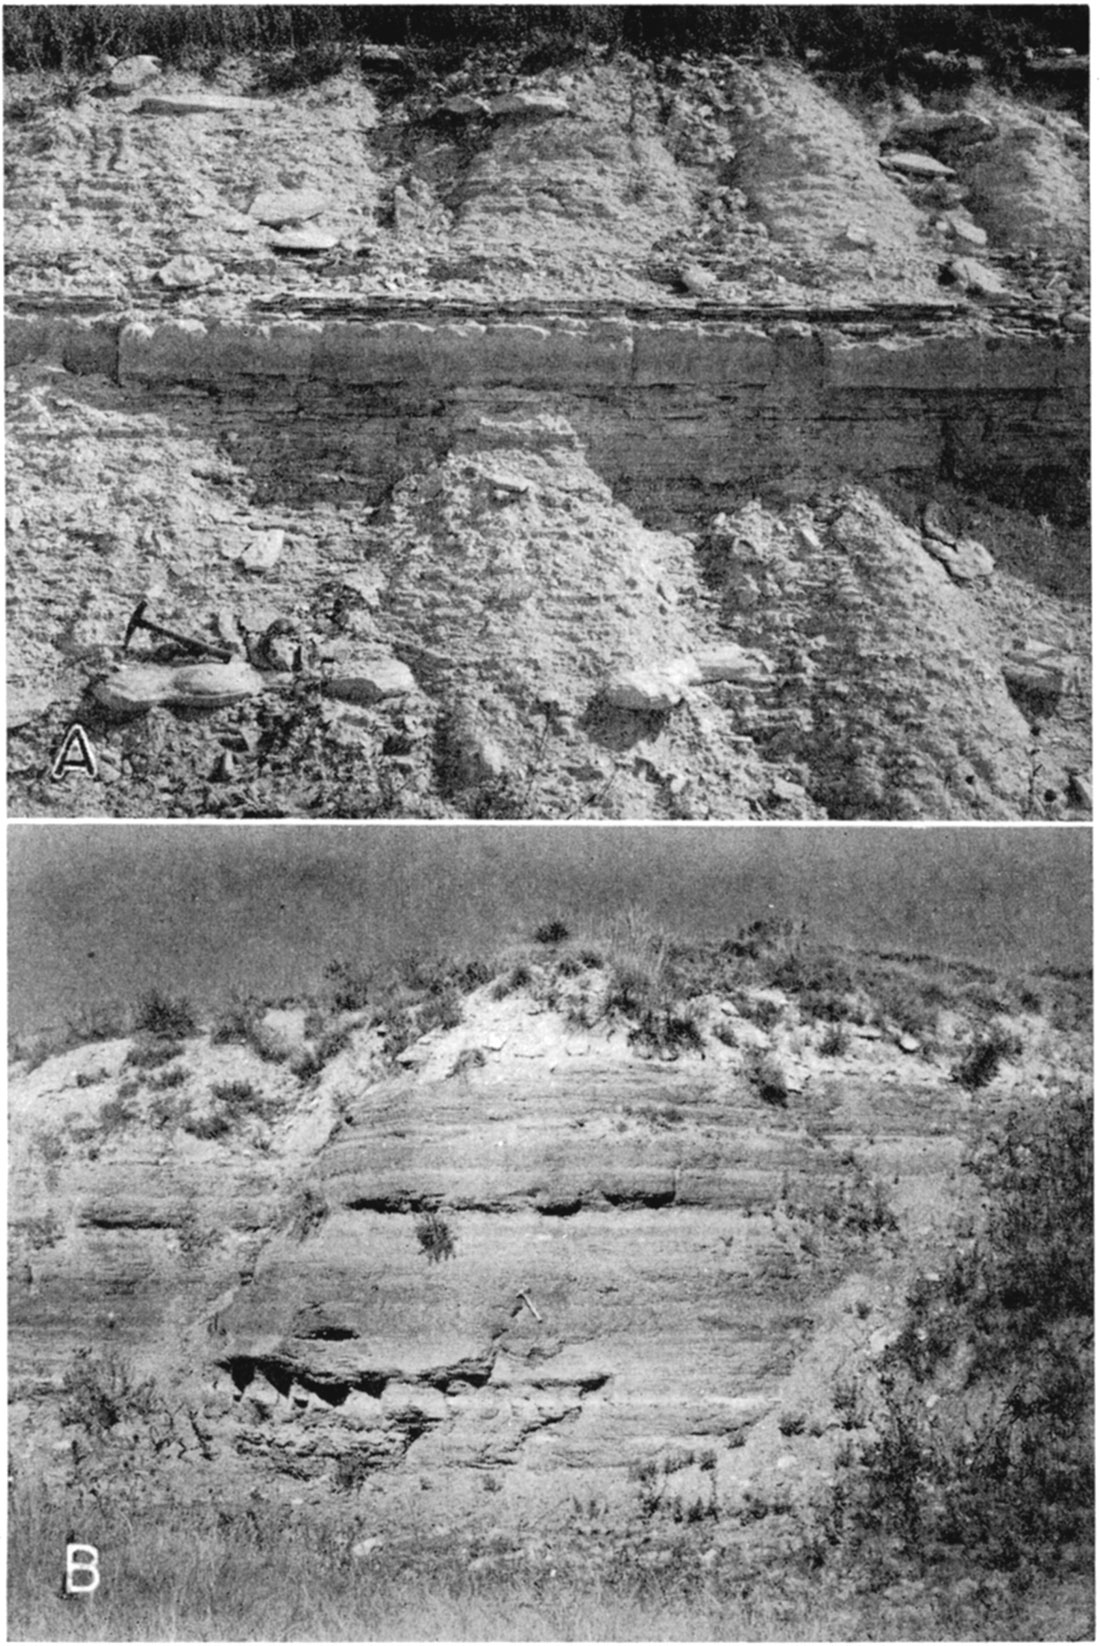 Two black and white photos; contact of the Fairport chalky shale member of the Carlile shale and the Pfeifer shale member of the Greenhorn limestone; Contact of the Jetmore chalk member and the Hartland shale member of the Greenhorn limestone.